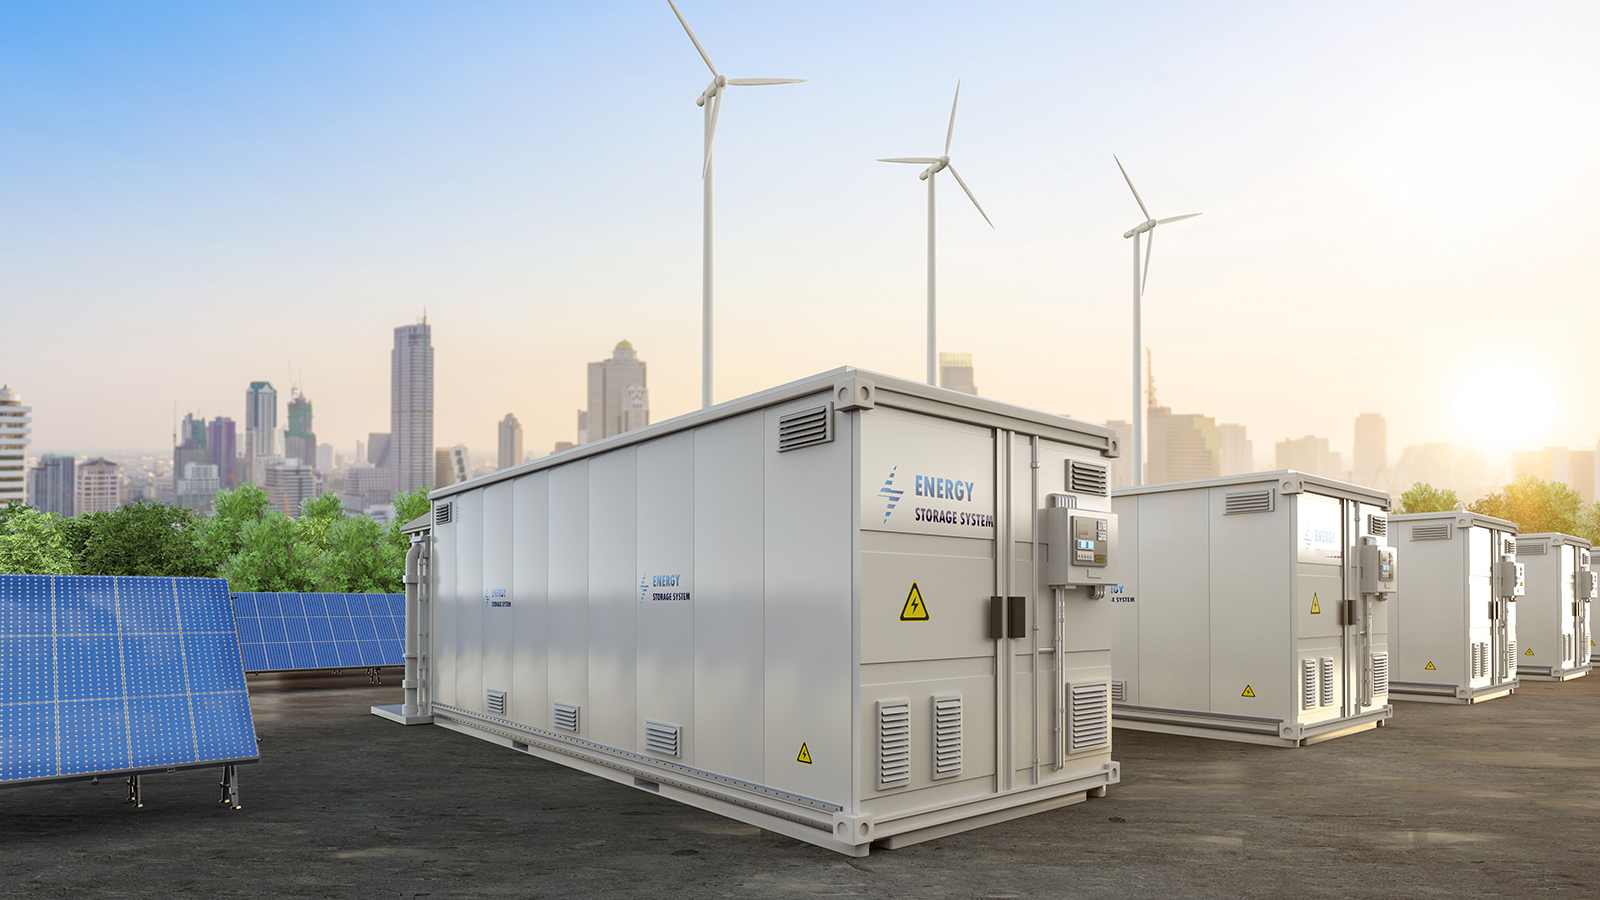 Energy storage systems in Africa